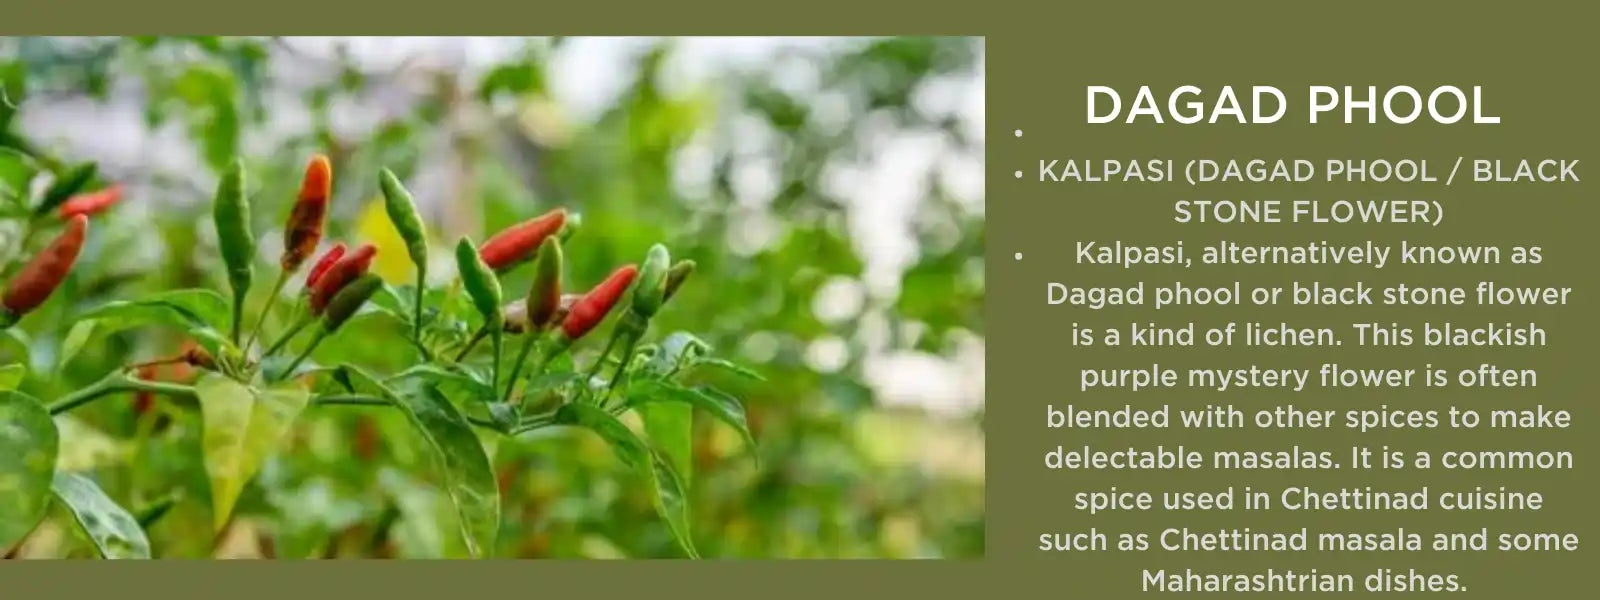 Dagad phool- Health Benefits, Uses and Important Facts